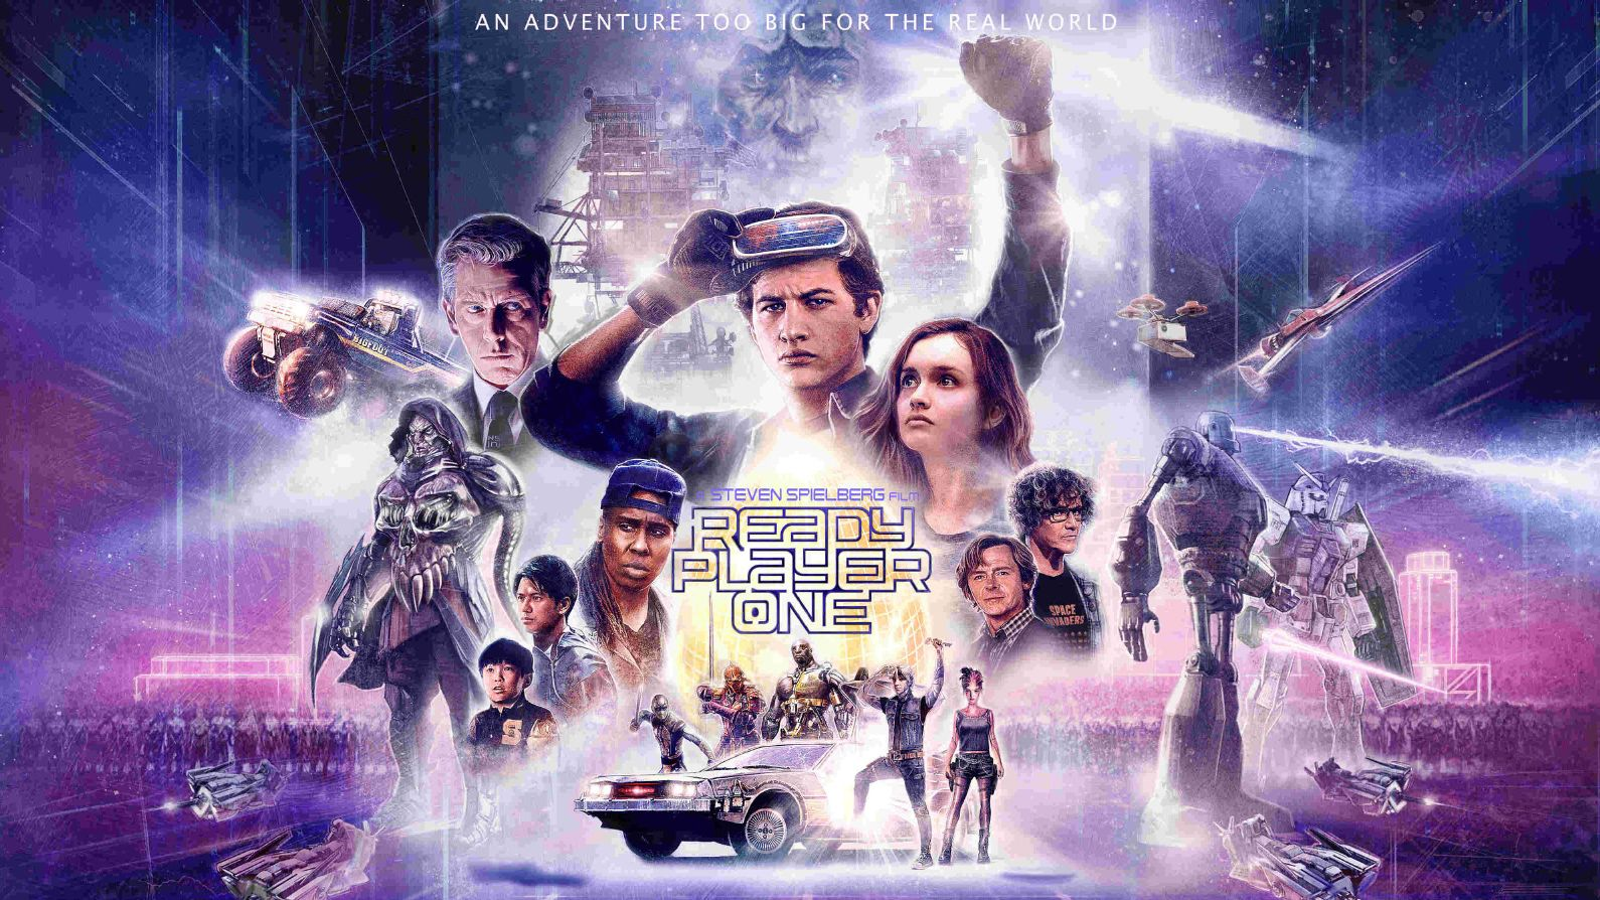 Ready Player One movie poster (e) - 11 x 17 - Back To The Future